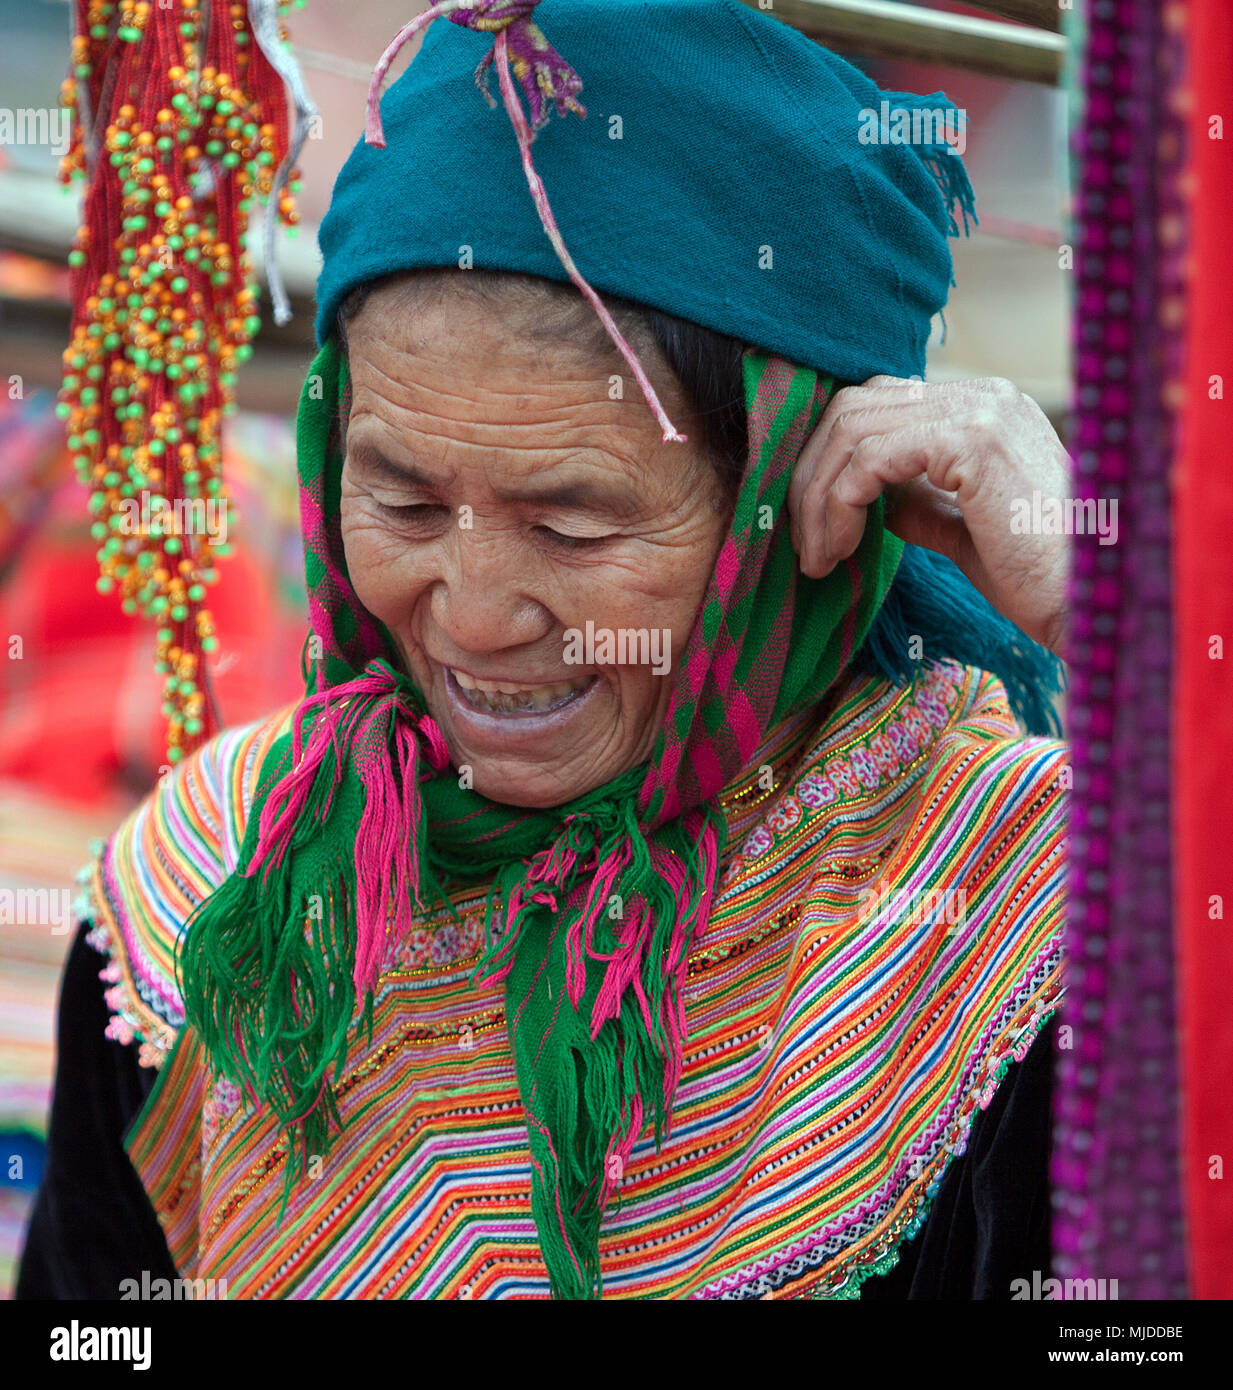 Woman dressed in traditional tribal dress with beads and weavings at Can Cao market near Sapa, Vietnam. Stock Photo